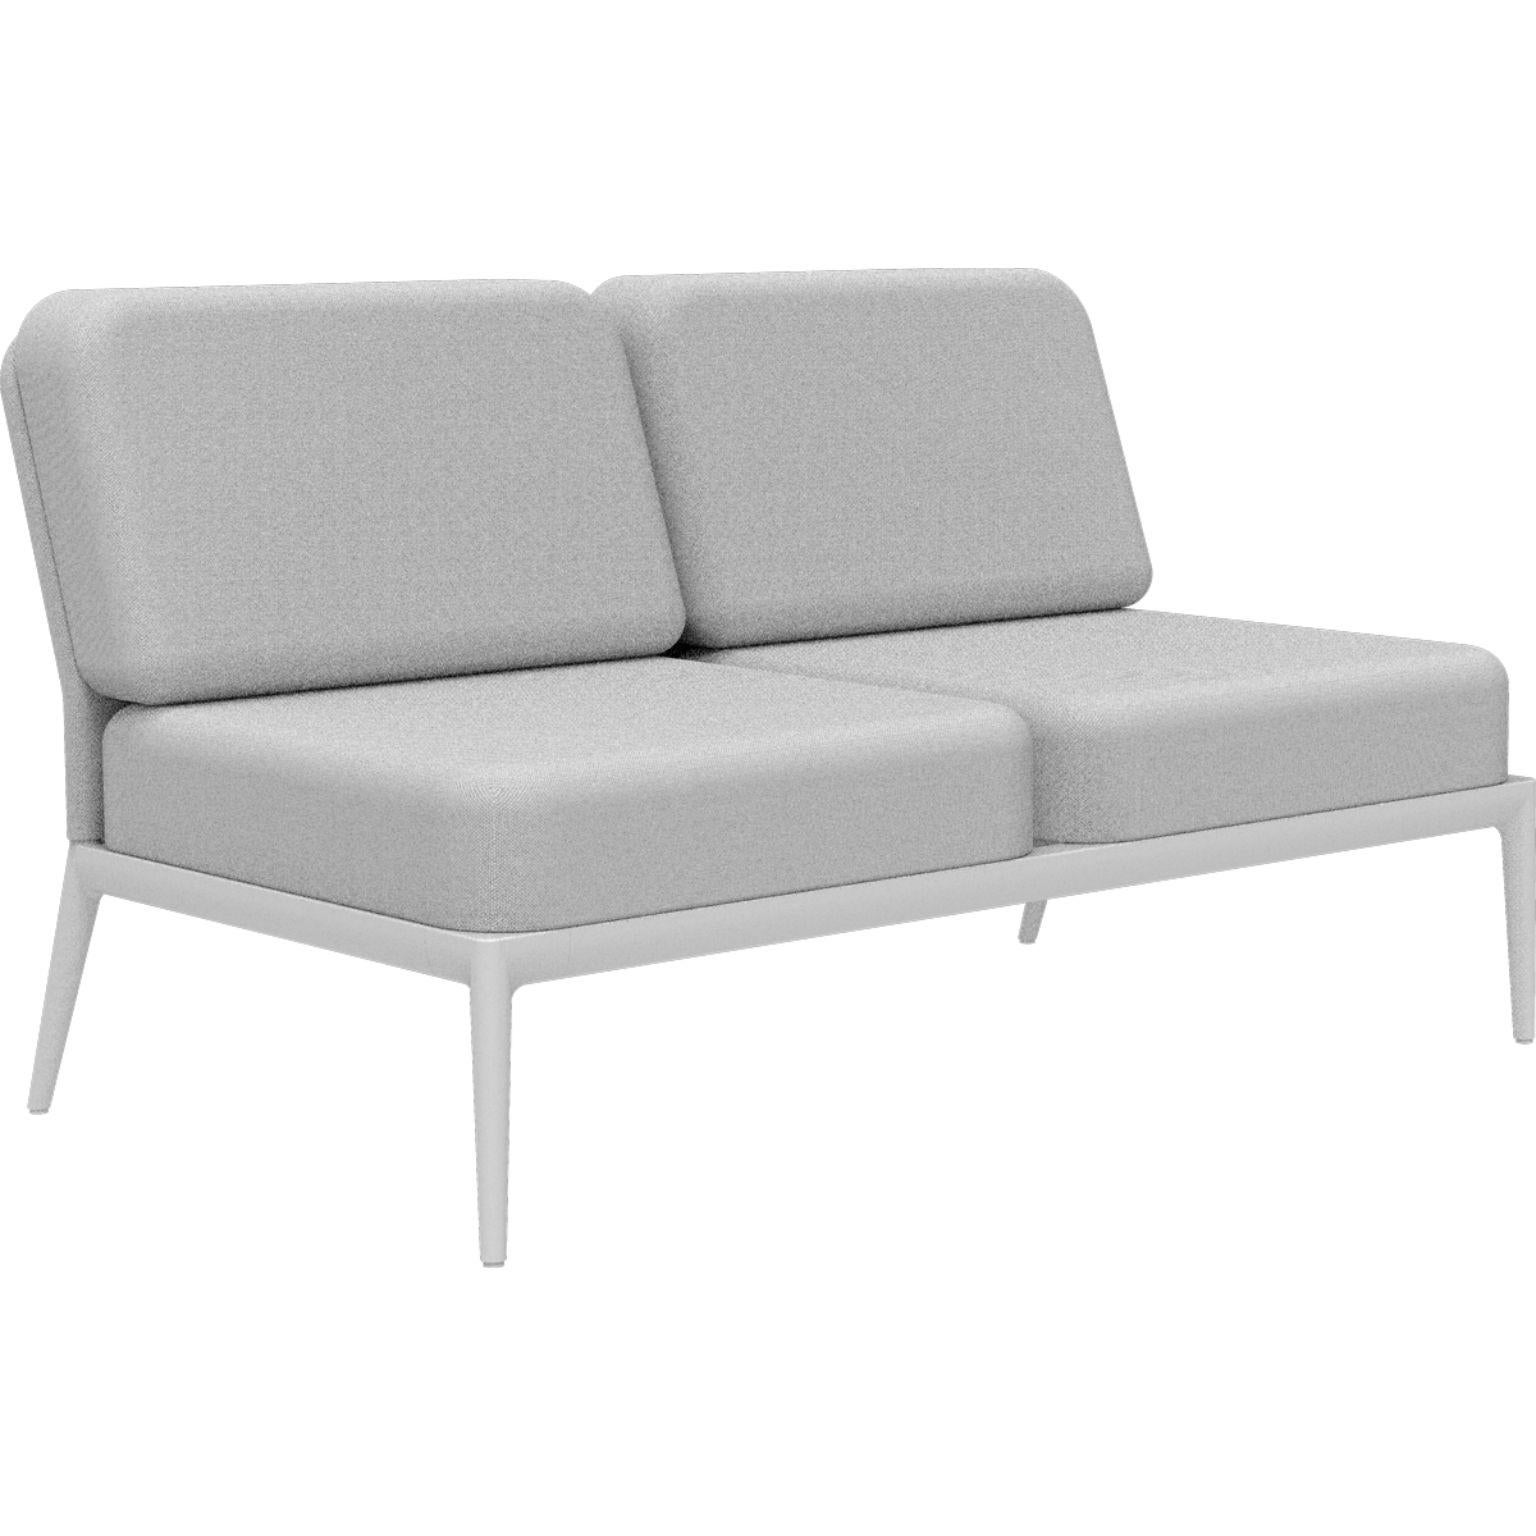 Cover White Double Central modular sofa by MOWEE
Dimensions: D83 x W136 x H81 cm (seat height 42 cm).
Material: Aluminum and upholstery.
Weight: 27 kg.
Also available in different colors and finishes. 

An unmistakable collection for its